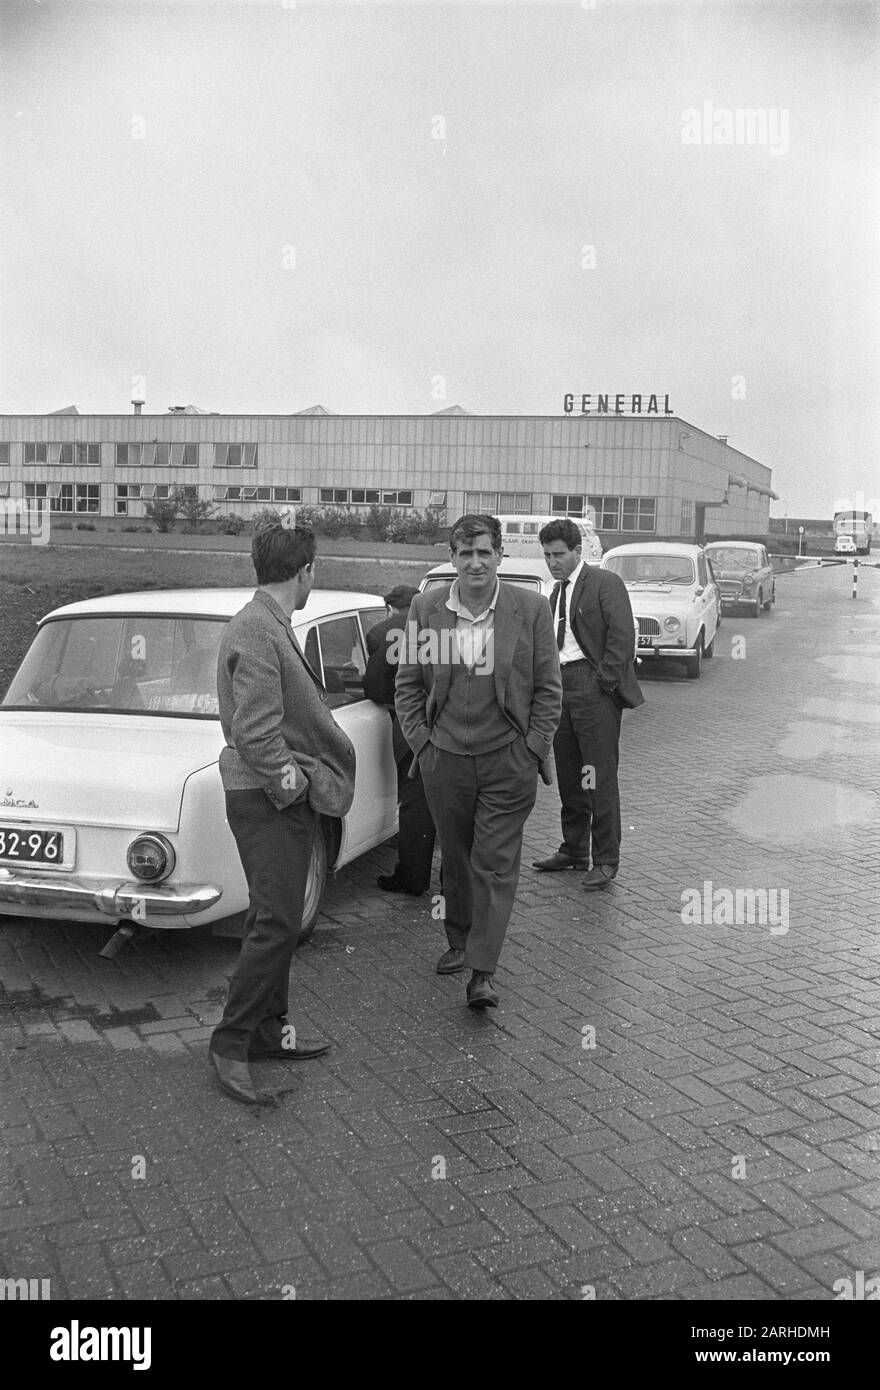 Six hundred men fired at General Tires in Amsterdam workers for closed factory Date: 24 May 1967 Location: Amsterdam, Noord-Holland Keywords: WORKERS, LASSED, factories Personal name: General Tires Stock Photo